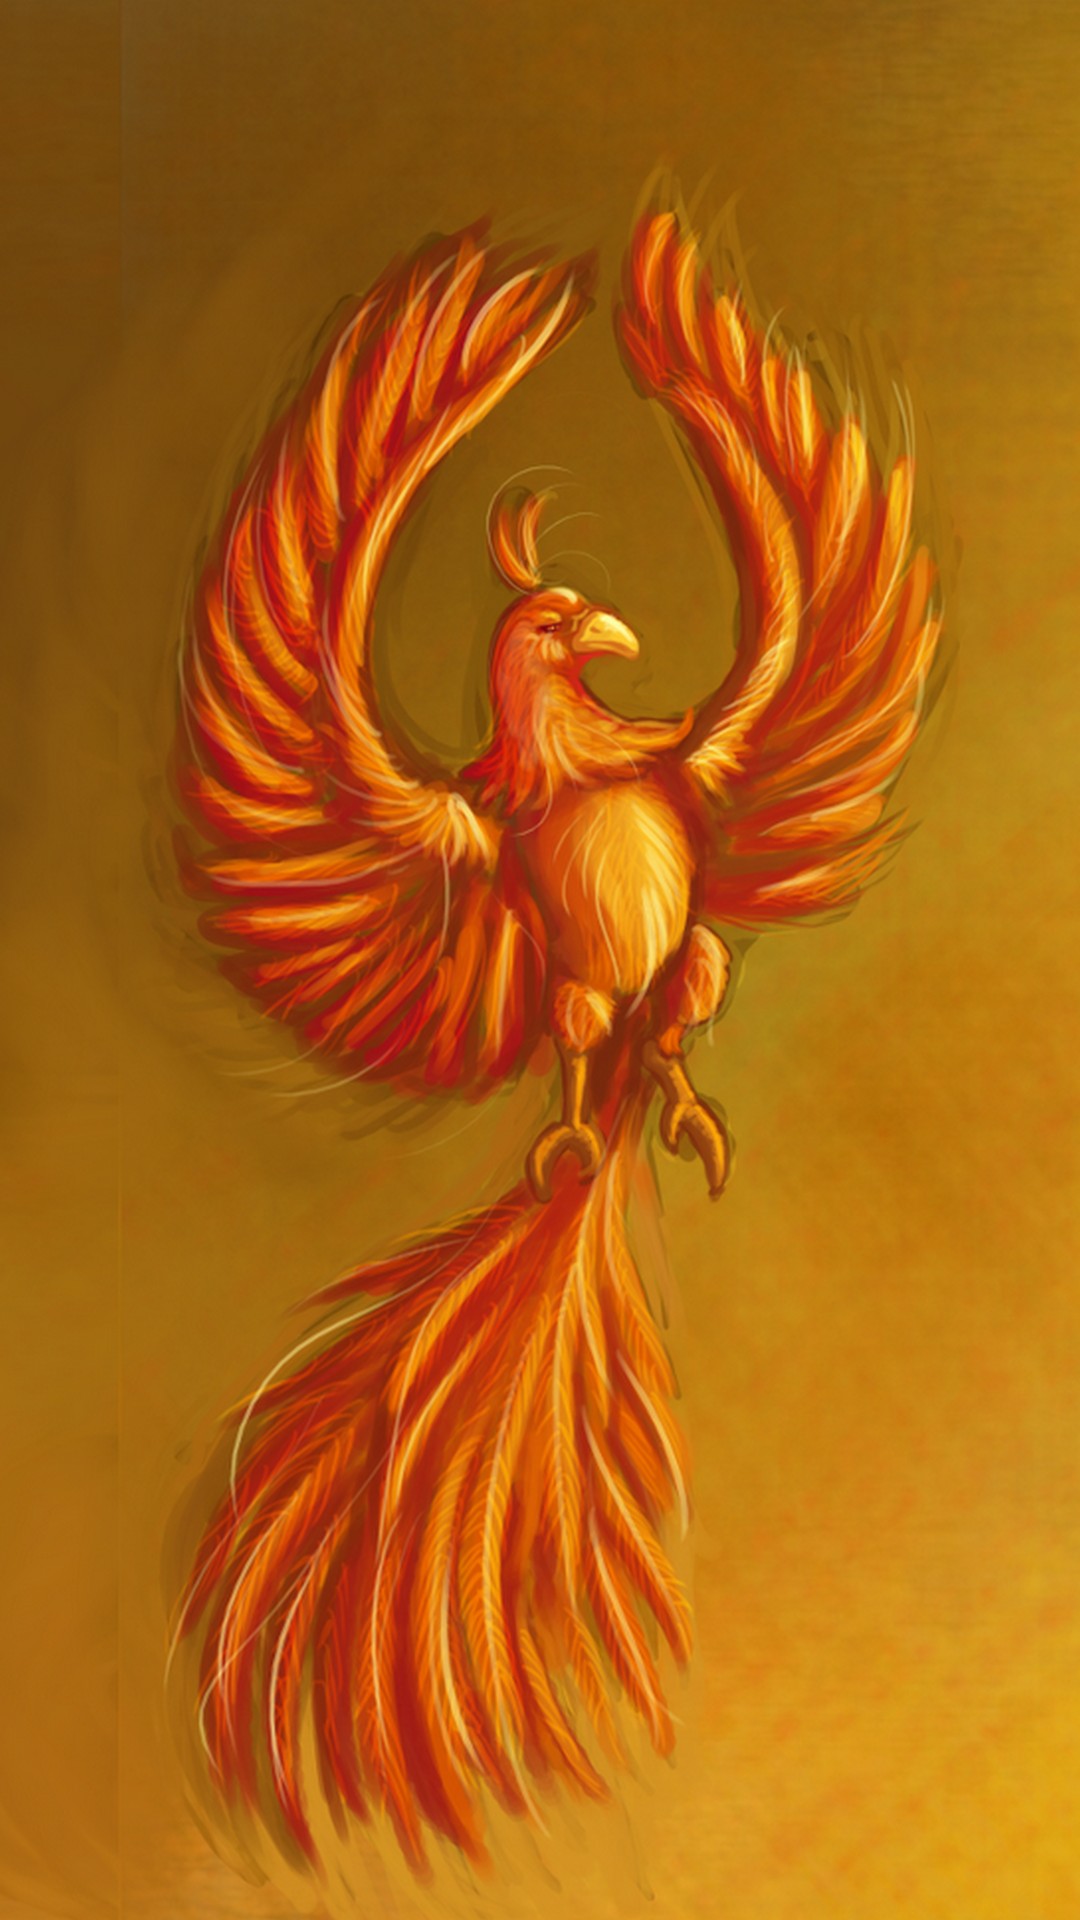 Phoenix Bird Android Wallpaper with resolution 1080X1920 pixel. You can make this wallpaper for your Android backgrounds, Tablet, Smartphones Screensavers and Mobile Phone Lock Screen